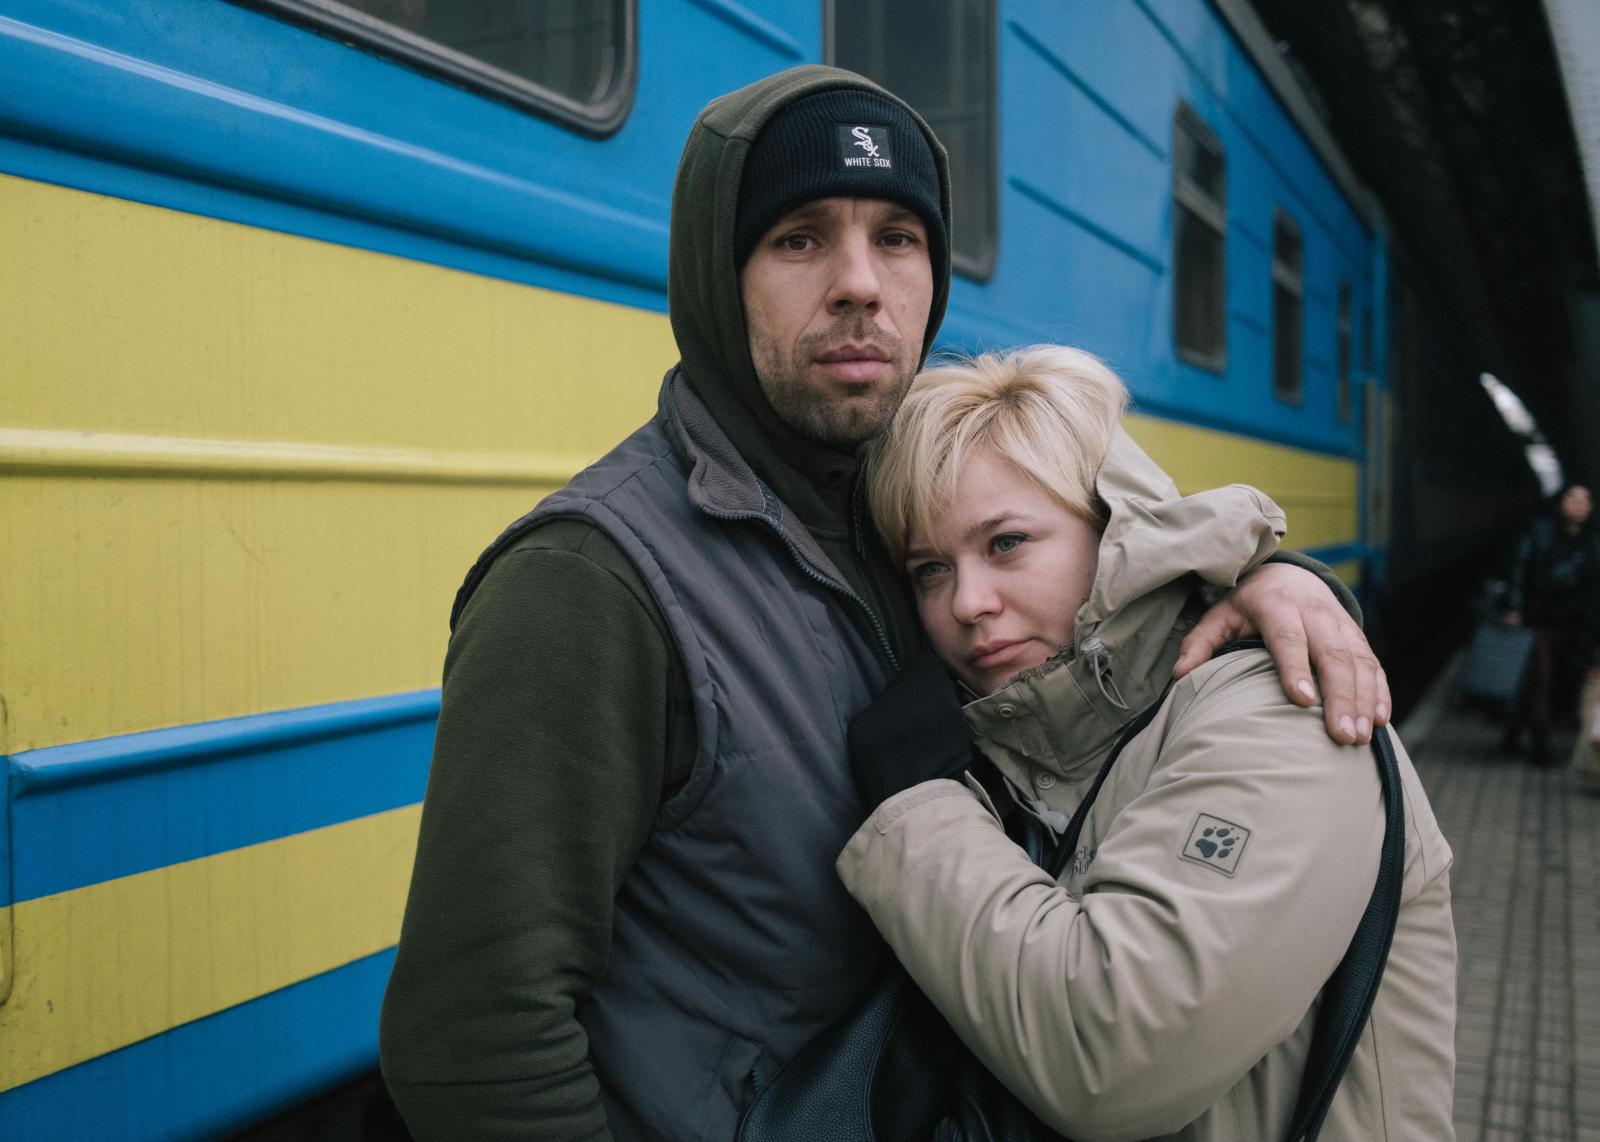 Escaping Putin's Bombs - Marina and Sergej are saying goodbye as he is heading to...